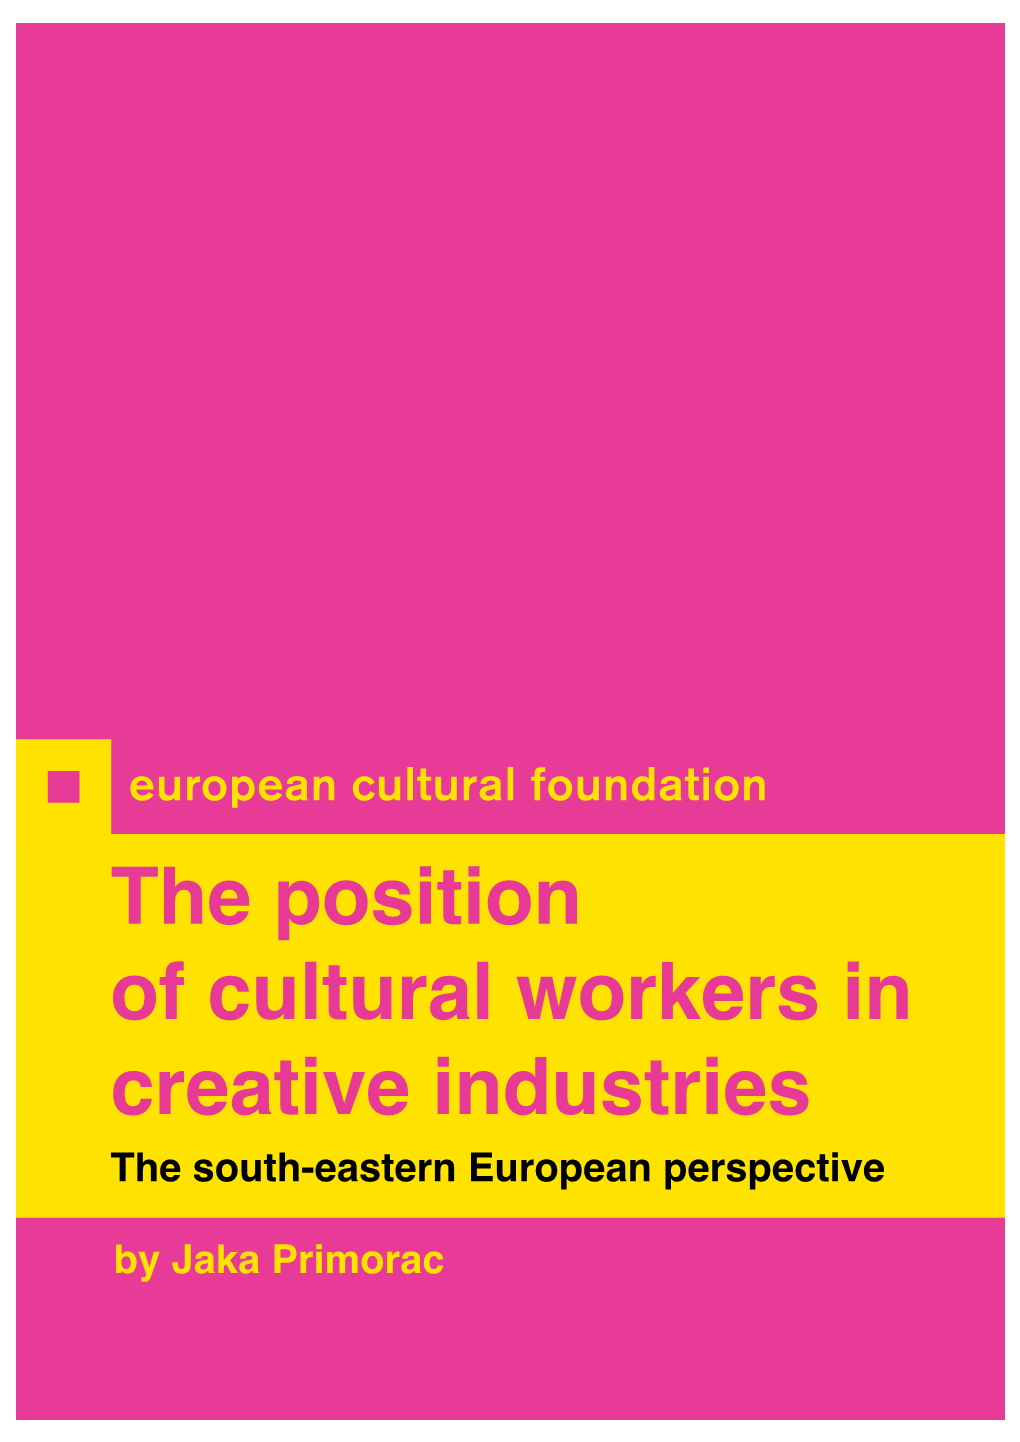 The Position of Cultural Workers in Creative Industries the South-Eastern European Perspective by Jaka Primorac